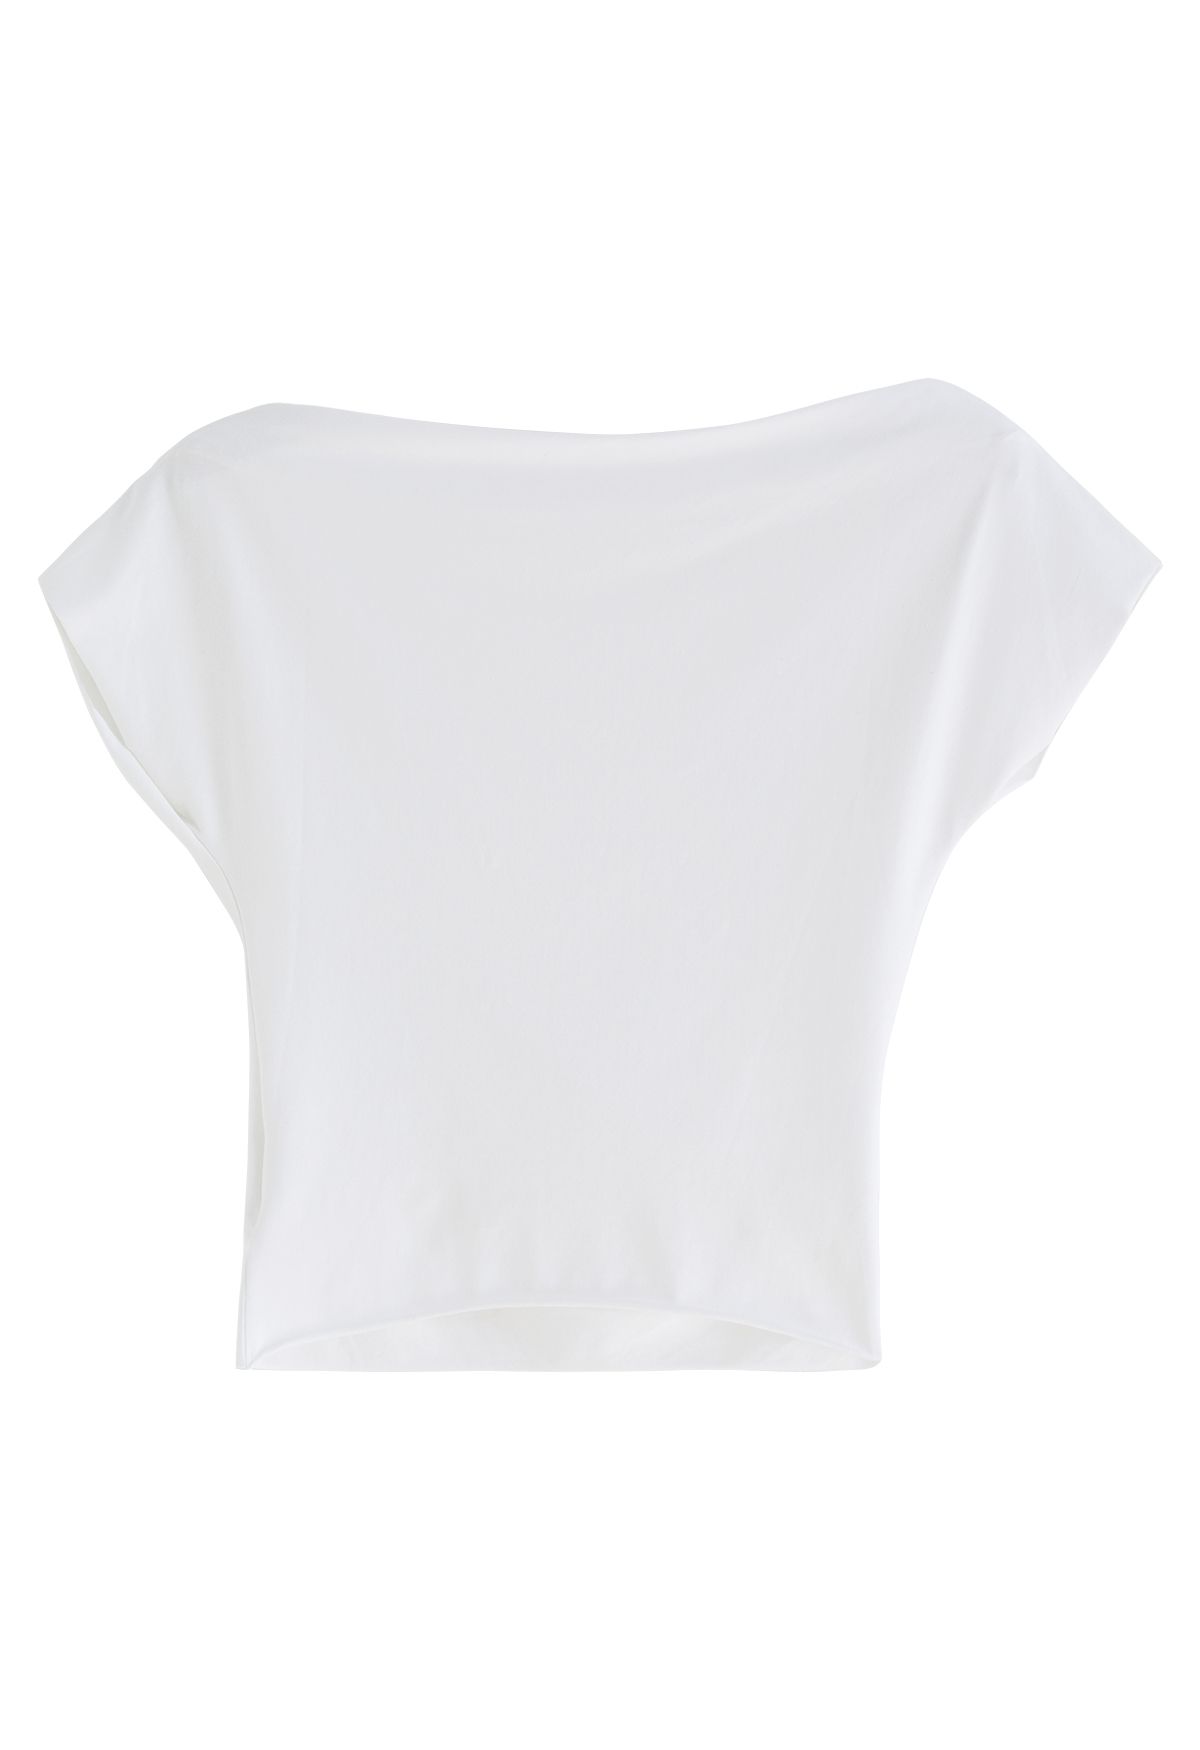 Asymmetric Boat Neck Ruched Top in White - Retro, Indie and Unique Fashion